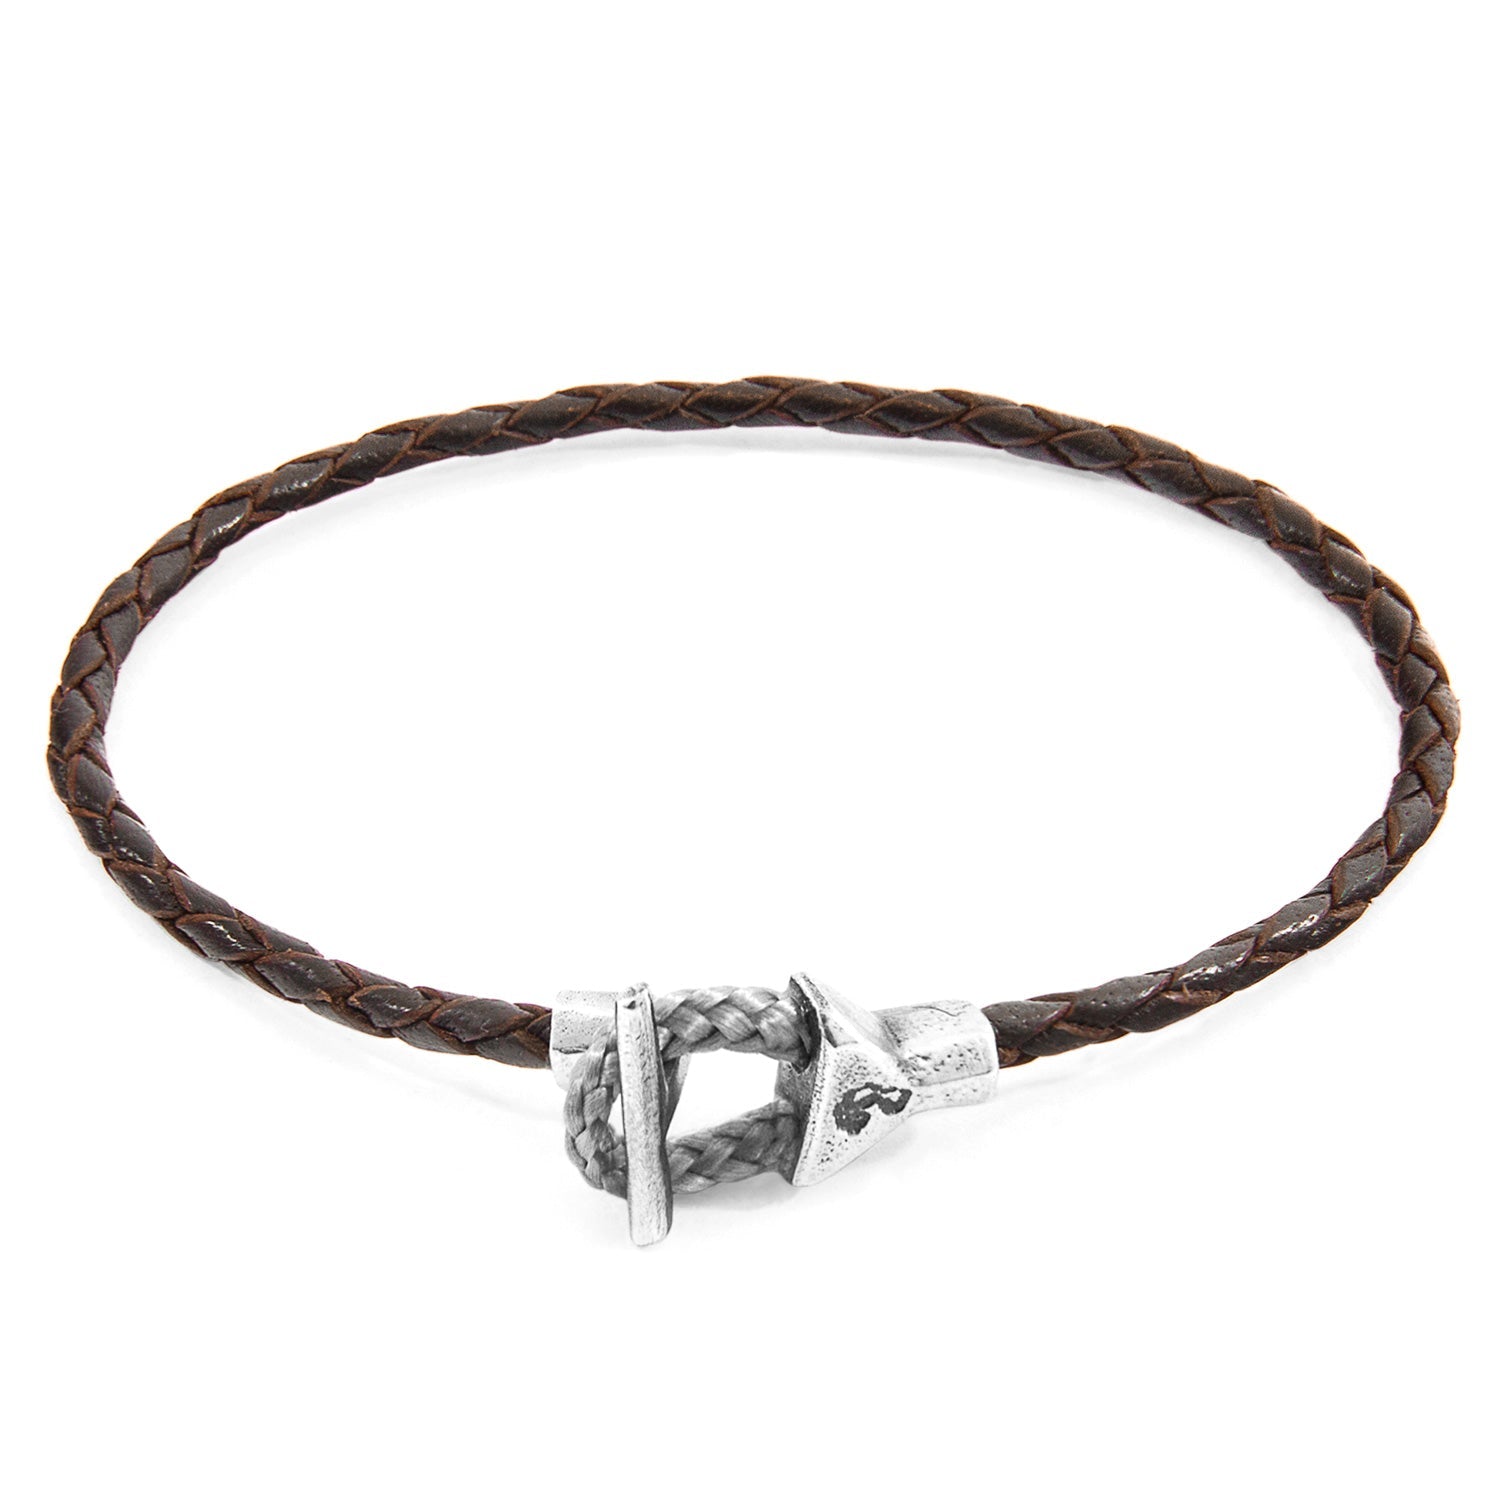 Dark Brown Cullen Silver and Braided Leather Bracelet - Handcrafted in Great Britain with Sterling Silver Clasp and Natural Leather Bijou Her